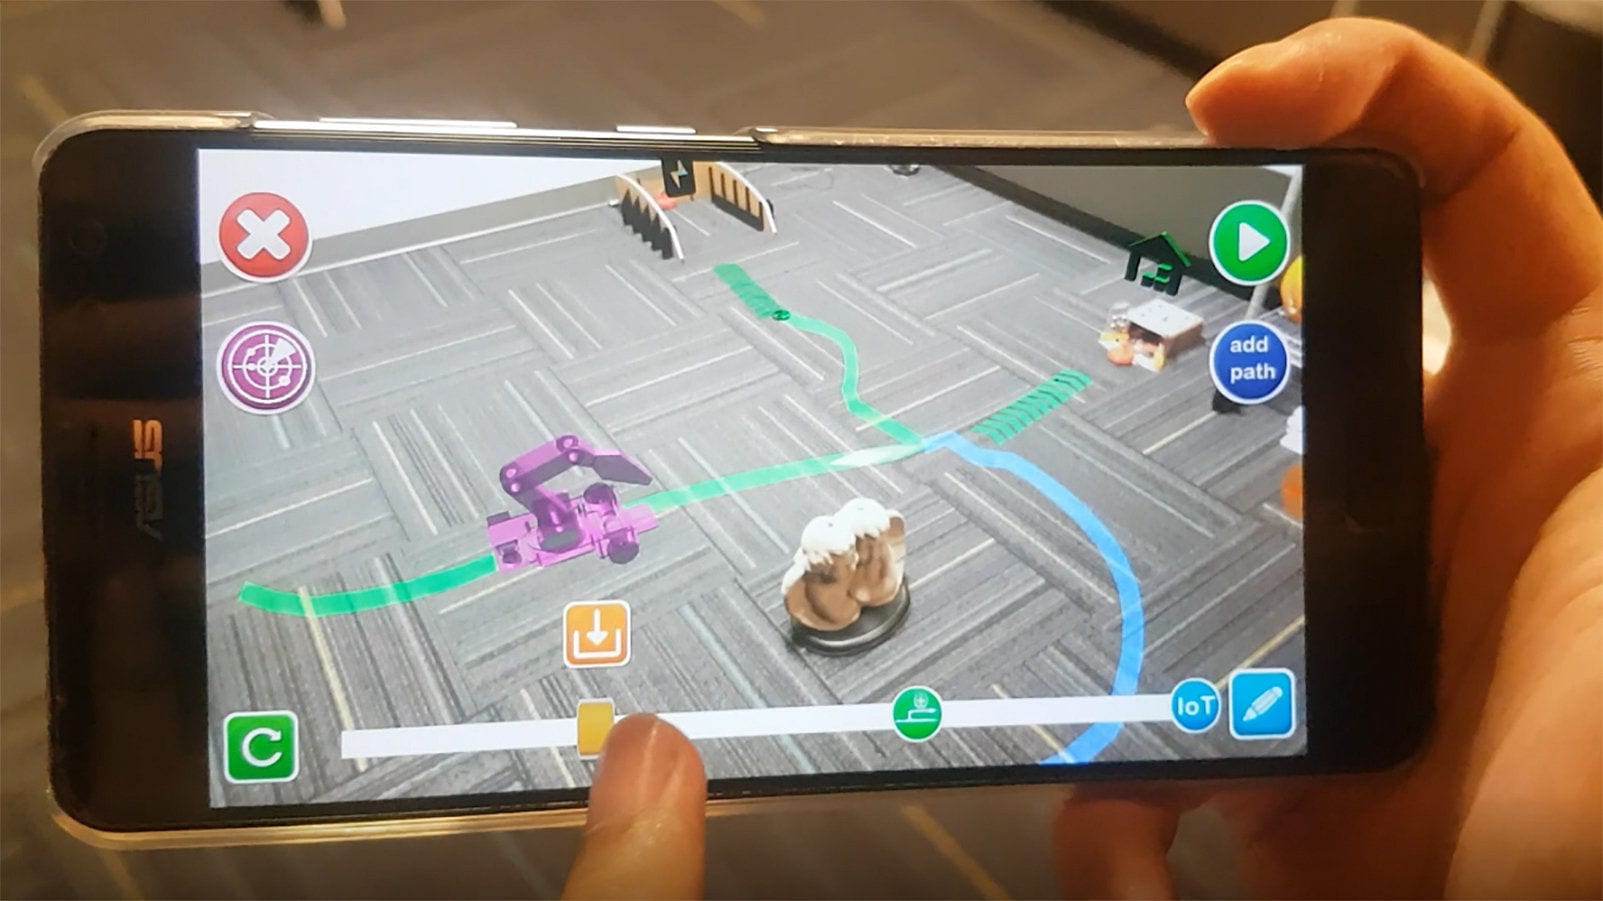 A smartphone app that allows a user to easily program any robot to perform a mundane activity